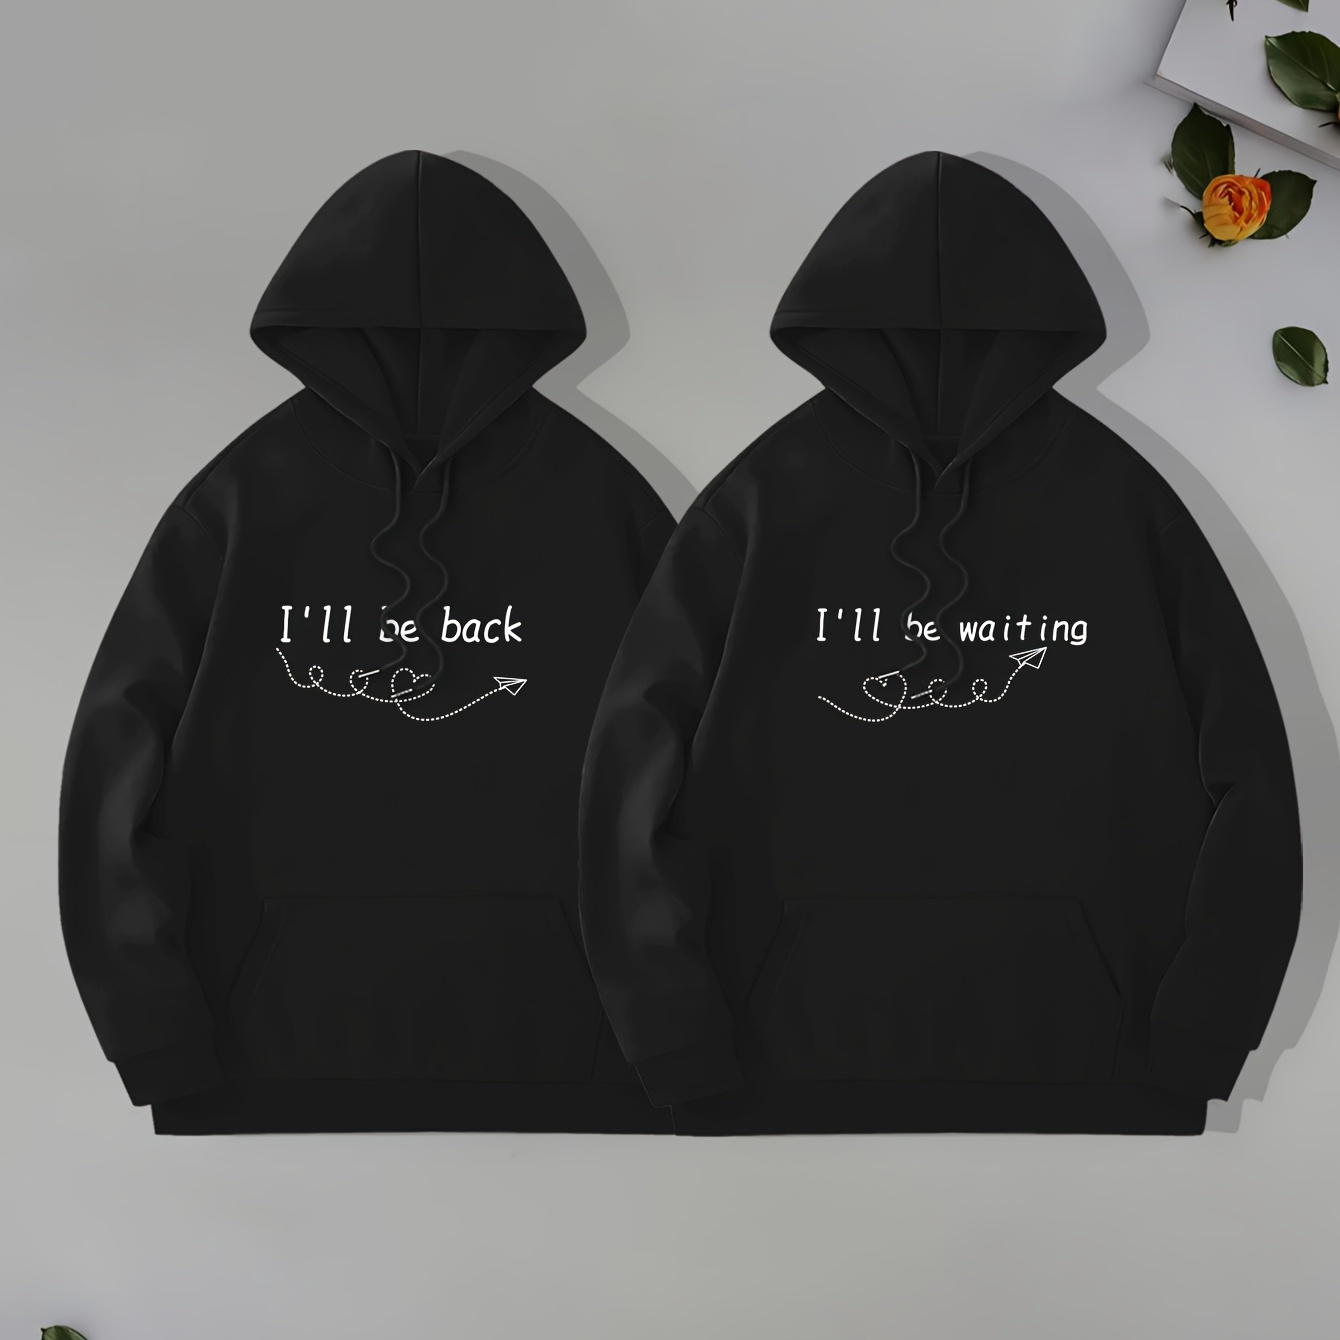 

I Will Be Back Print Lovers Pullover Round Neck Hoodies With Kangaroo Pocket Long Sleeve Hooded Sweatshirt Loose Casual Top For Autumn Winter Men's Clothing As Gifts Valentine's Day